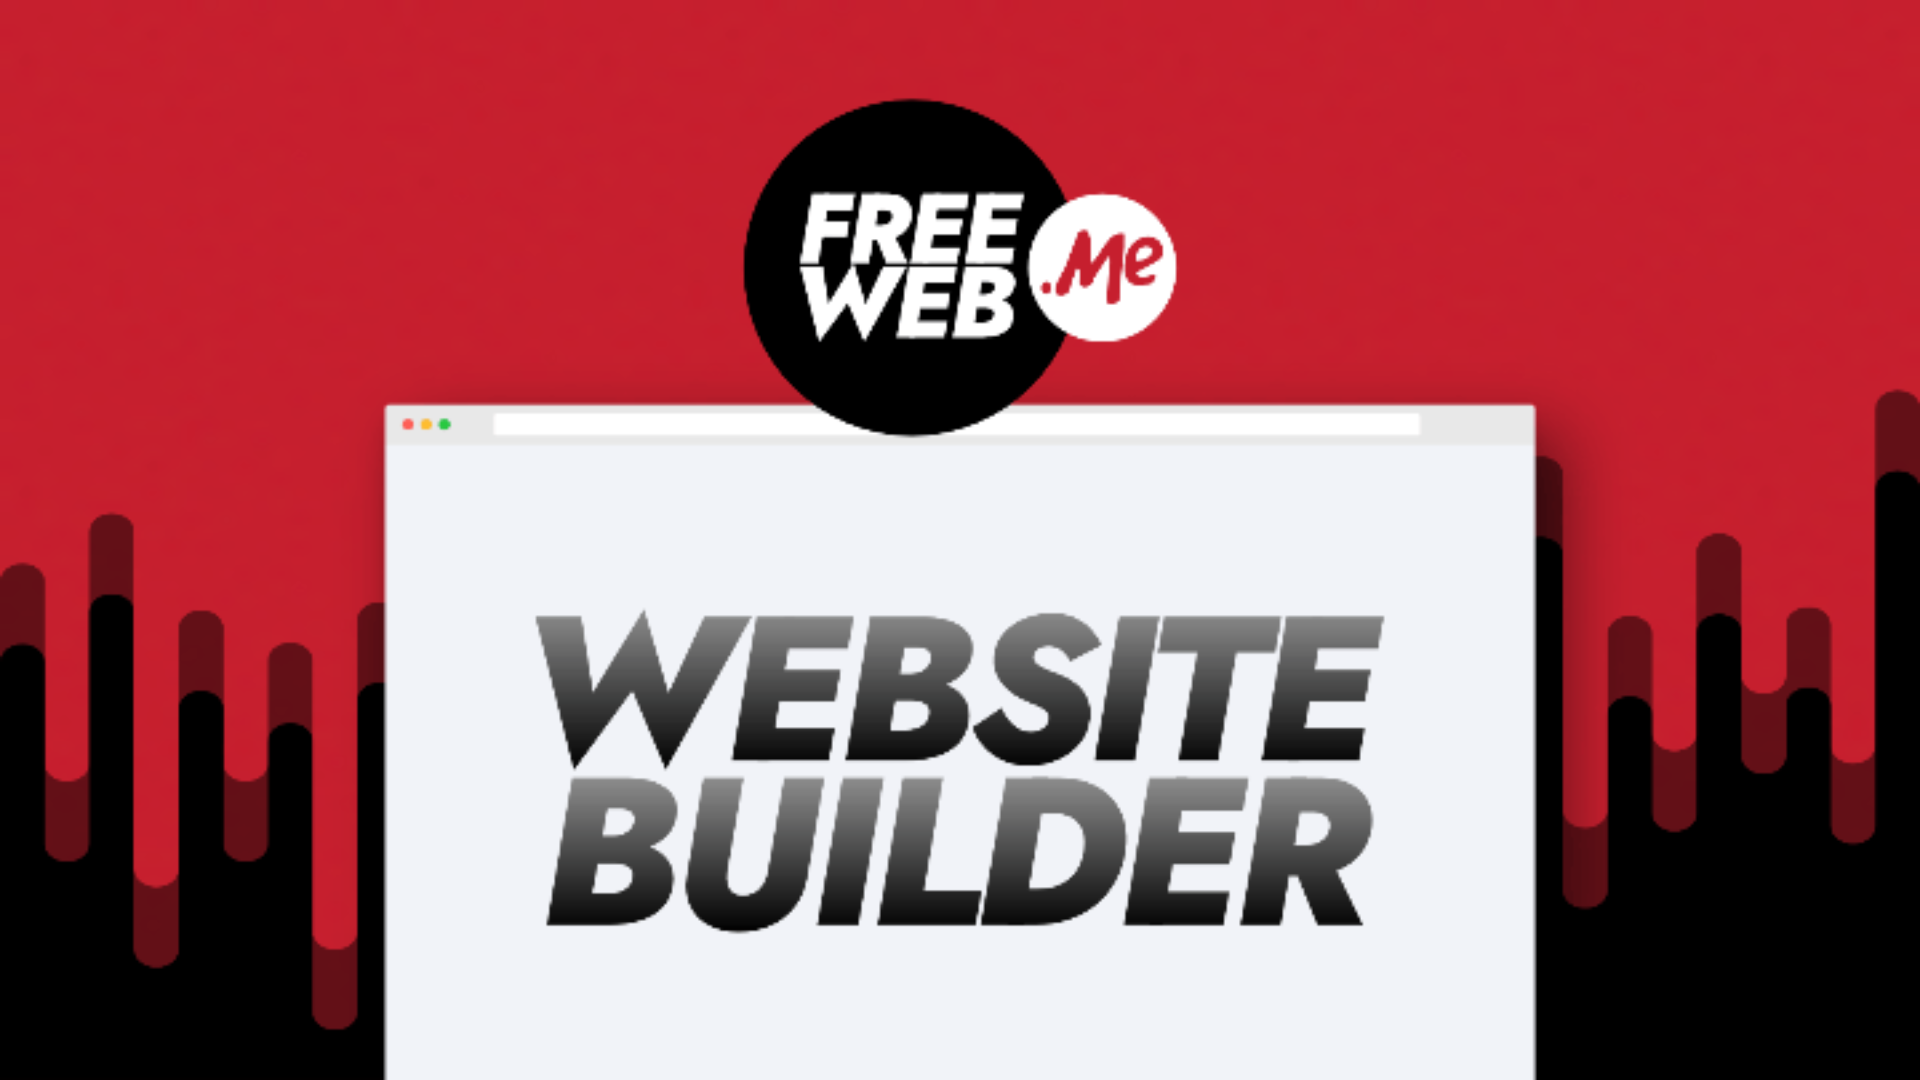 Lifetime Deal to FreeWeb.me – Unlimited Website Builder: Unlimited Plan for $99